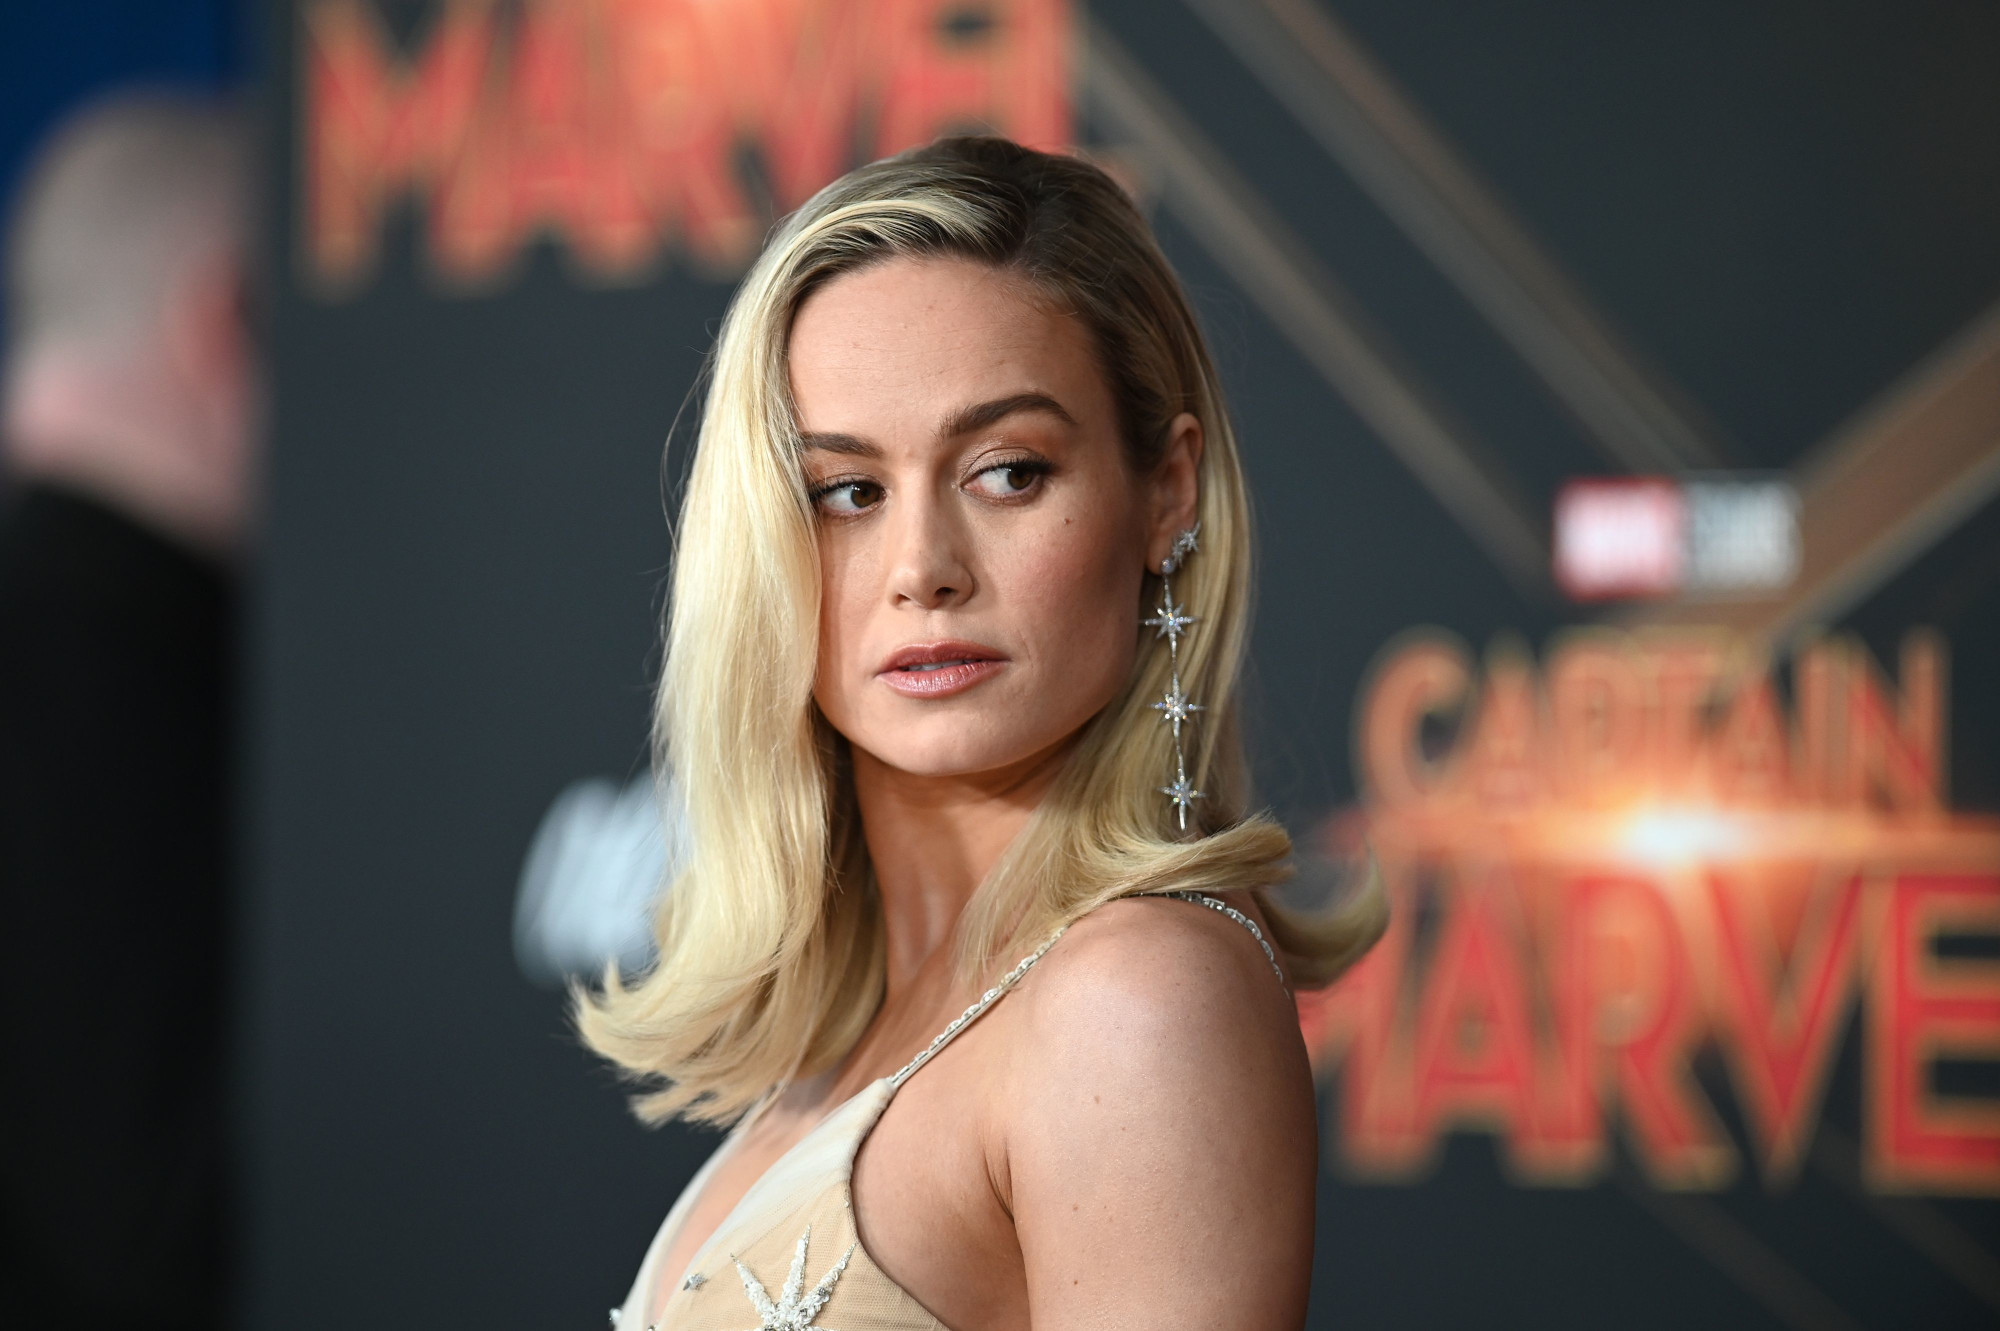 'Captain Marvel' star Brie Larson on the red carpet for the Marvel film. She's looking to the side, and her blonde hair is flipped up at the ends.